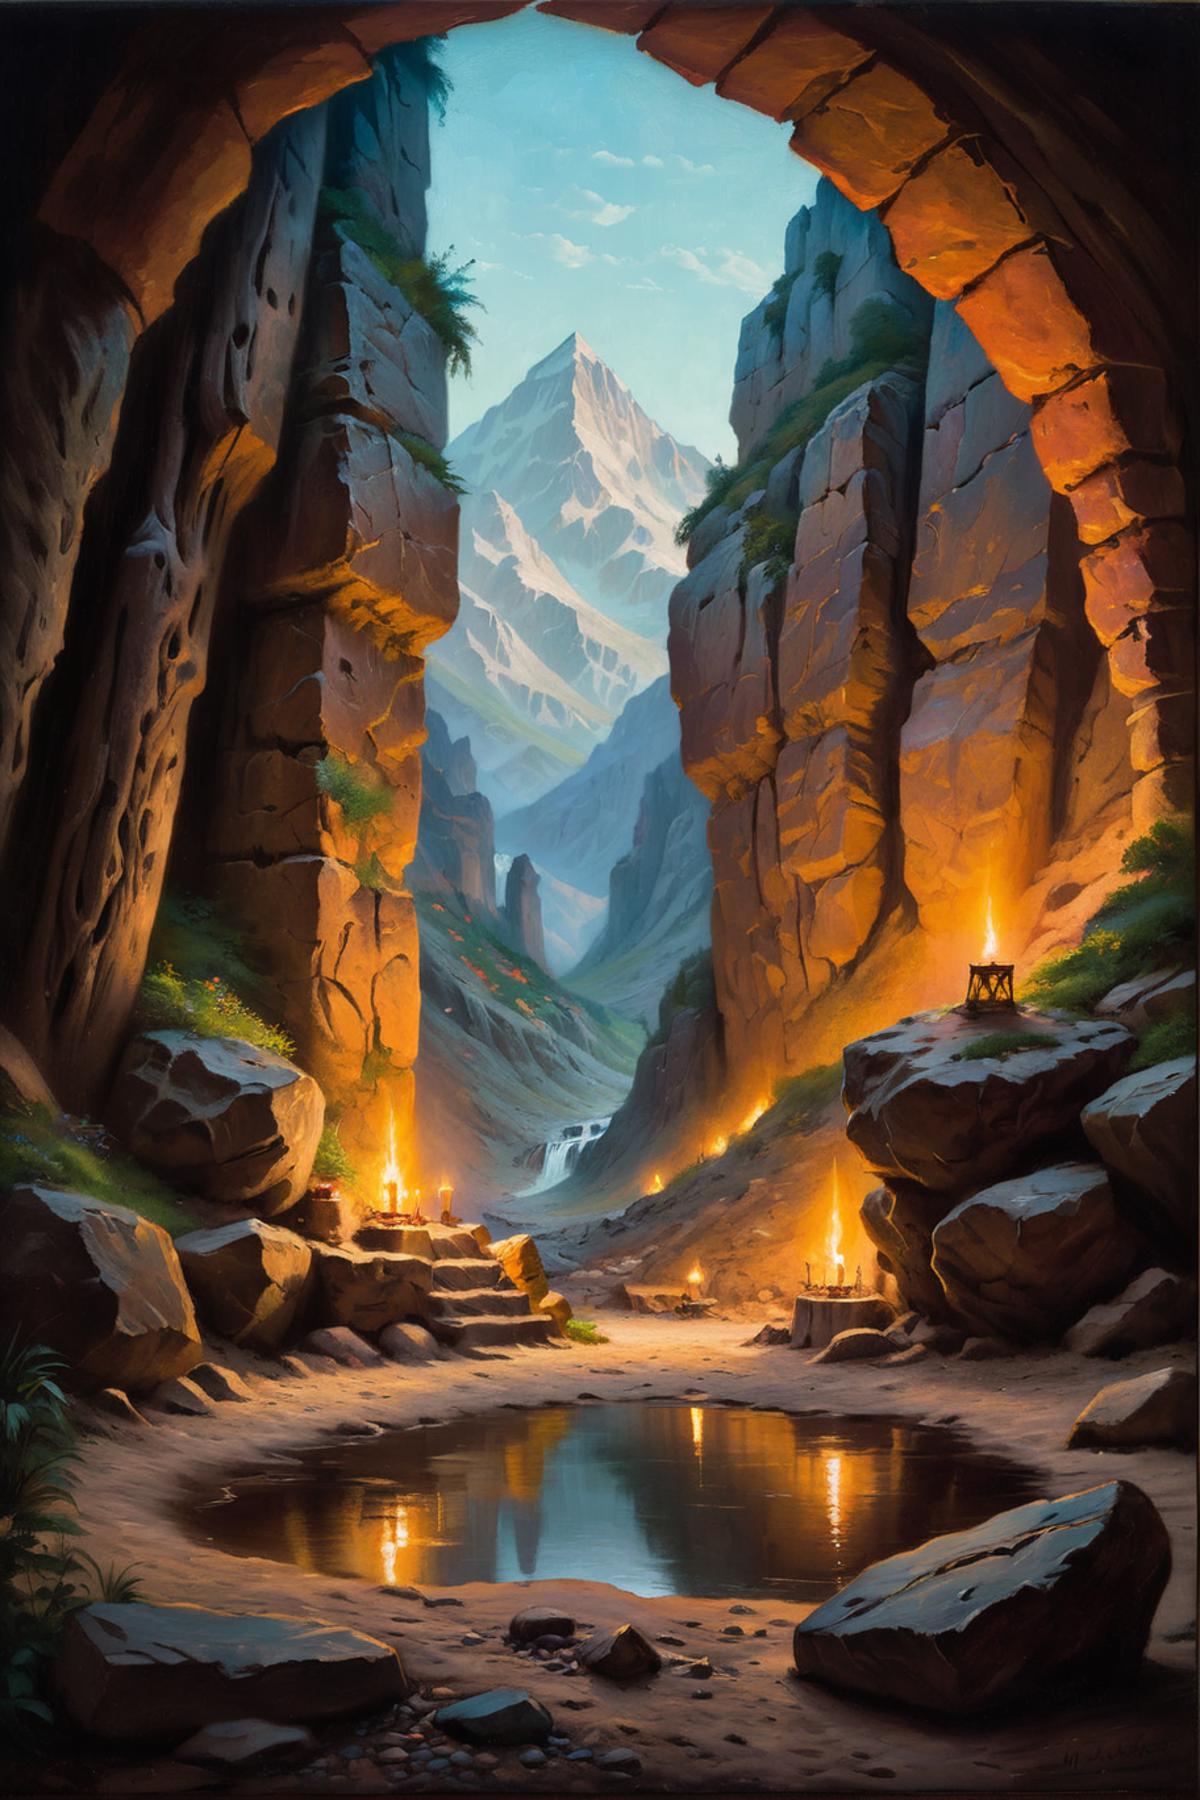 Painting of a mountainous area with a waterfall, rocky terrain, and lit candles.